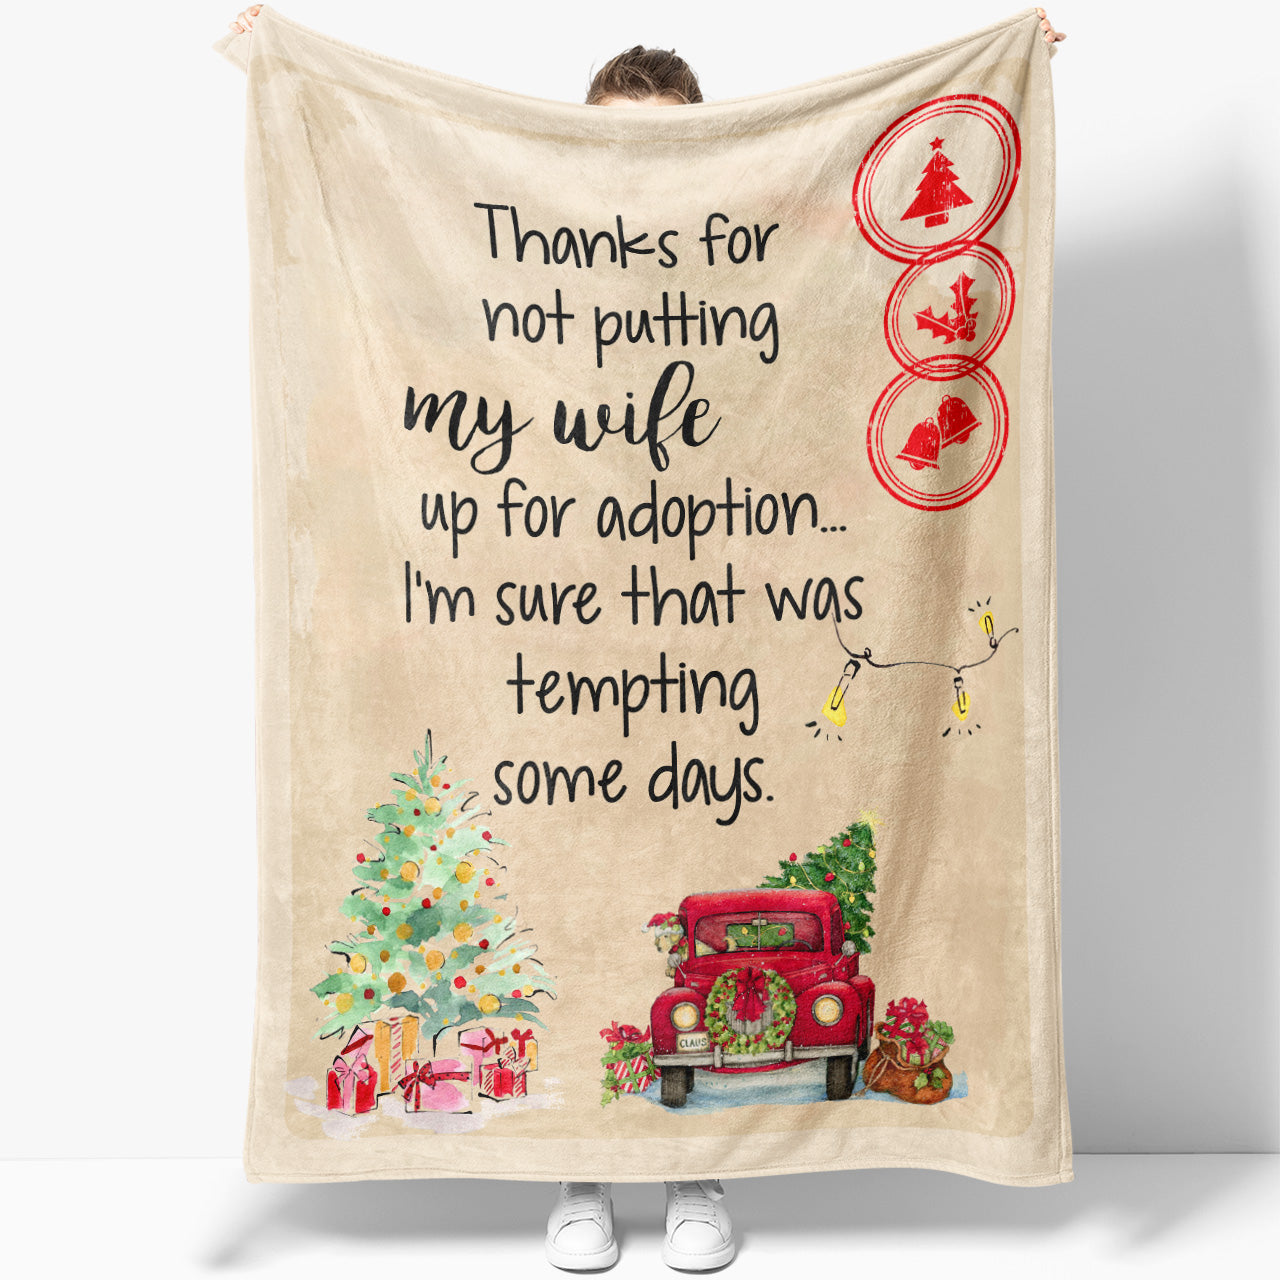 blanket Christmas Gift Ideas for Mother in Law from Son in Law Not Putting My Wife 20121102 - Fleece Blanket